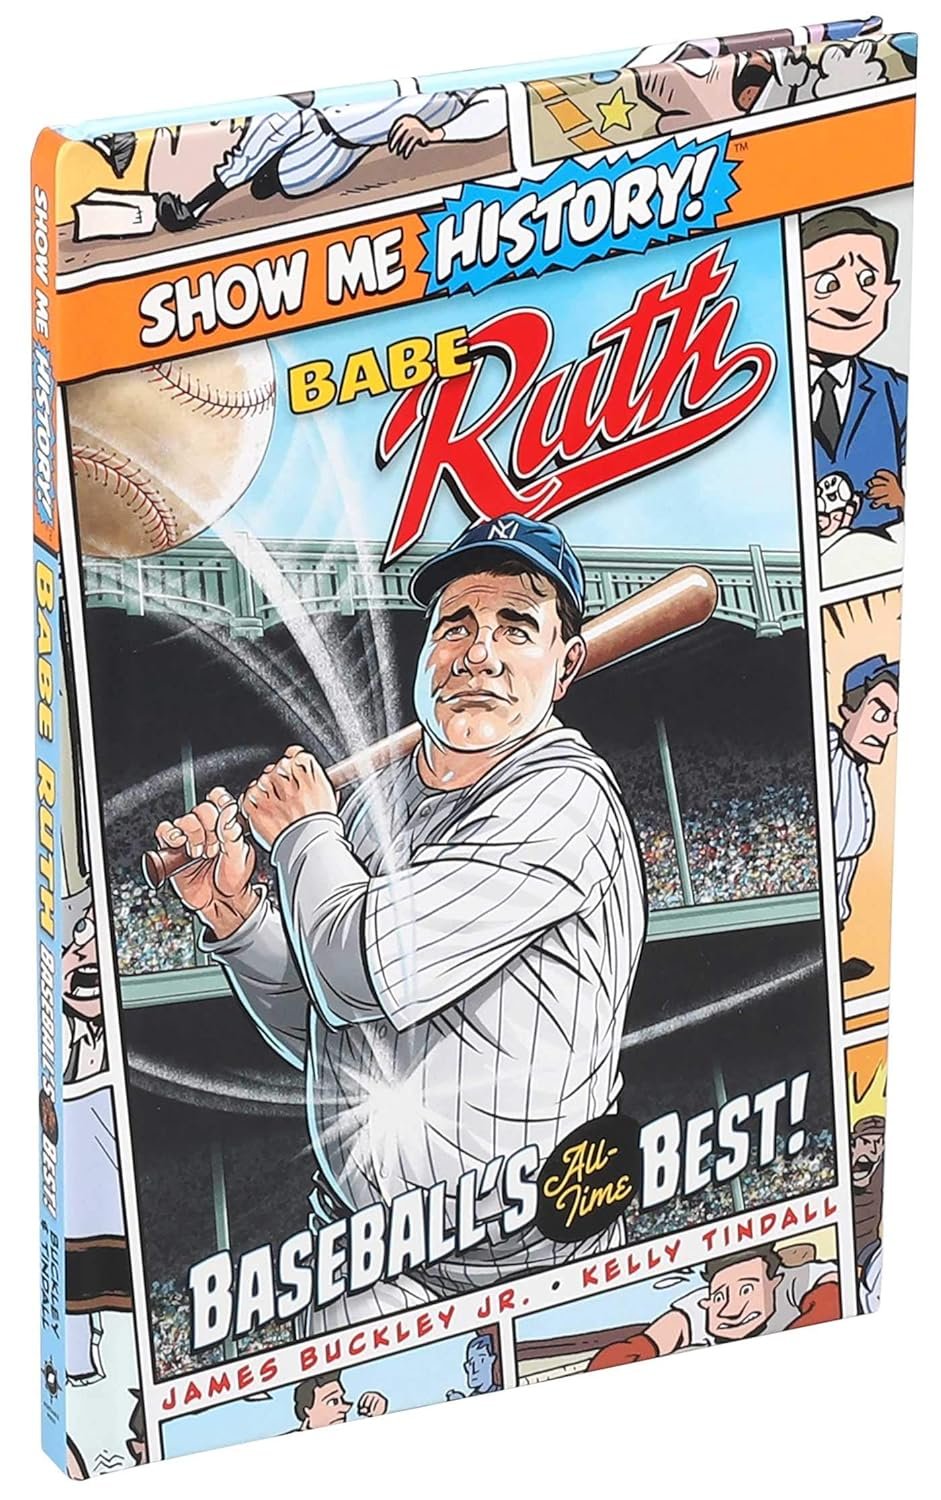 Babe Ruth: Baseball's All-Time Best! (Show Me History!)